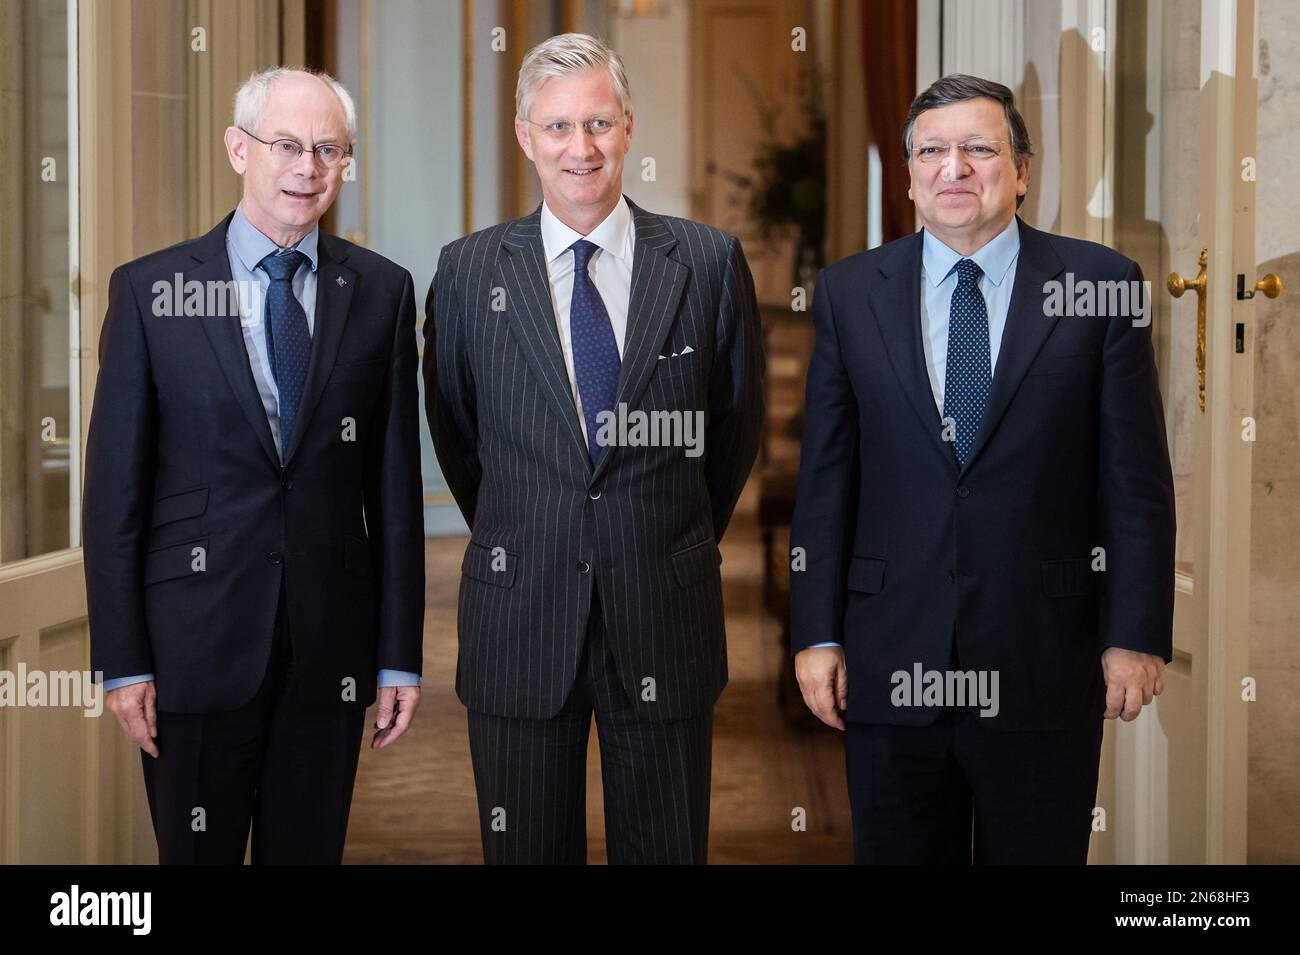 Belgium's King Philippe, center, poses for photographers with European Commission President Jose Manuel Barroso, right, and European Council President Herman Van Rompuy at the Royal Castle of Laeken in Brussels on Monday Nov. 4, 2013. (AP Photo/Geert Vanden Wijngaert) Stock Photo